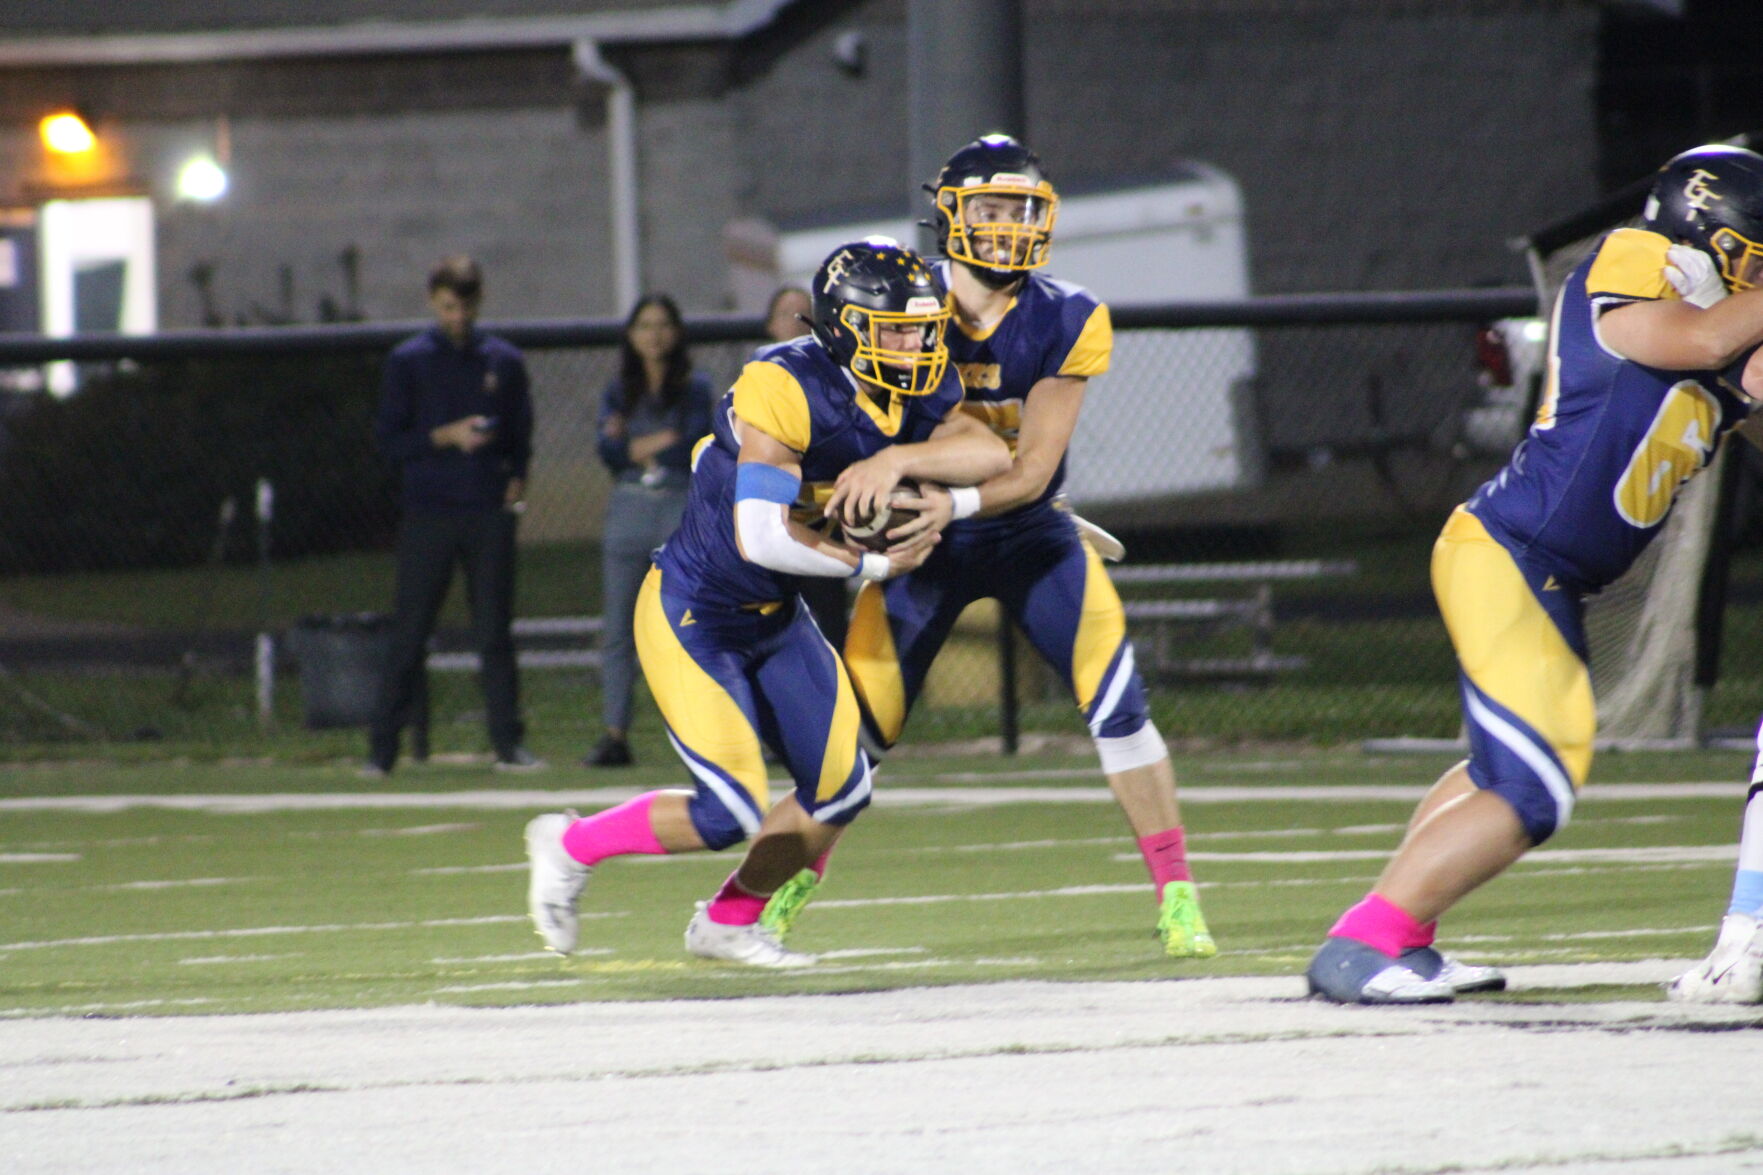 East Fairmont Extends Win Streak to Six Games After Dominating Liberty 55-21